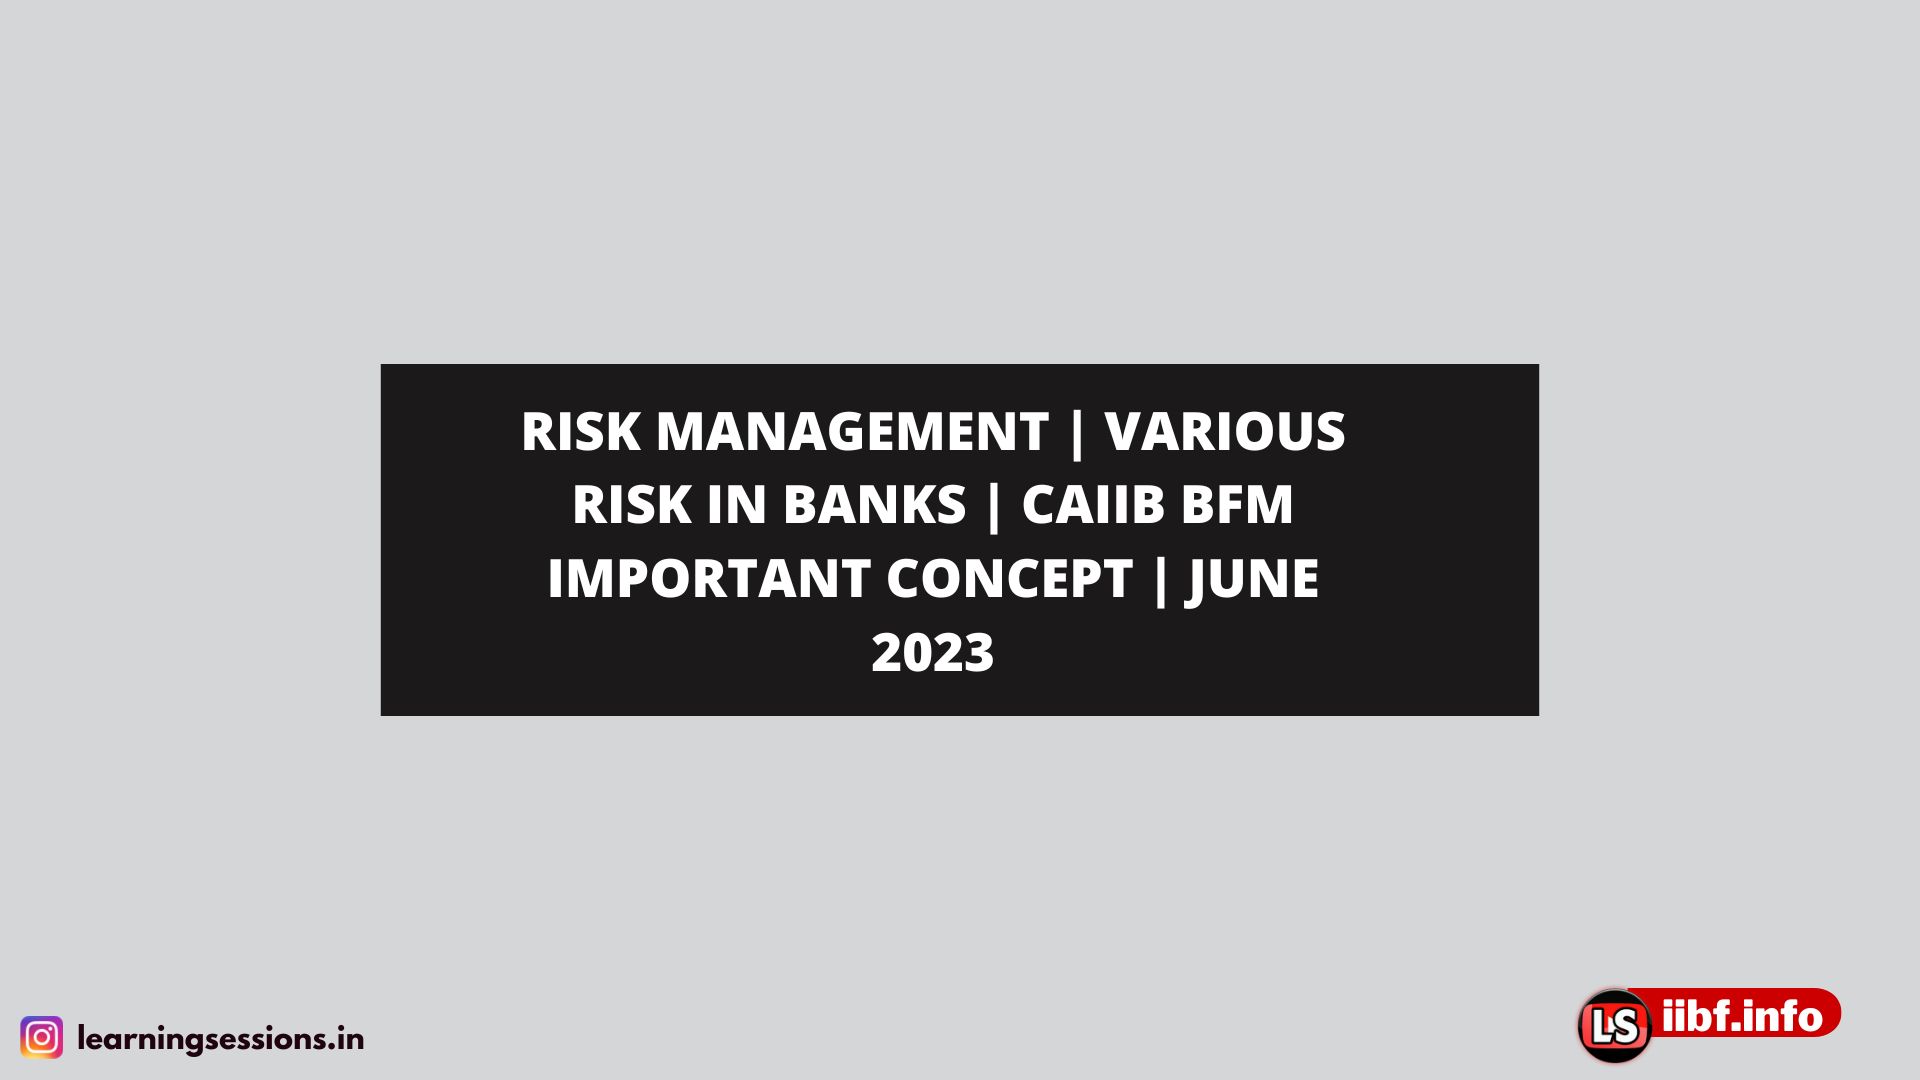 CAIIB BFM CONCEPT OF RISK WHAT ARE VARIOUS RISK IN BANKS